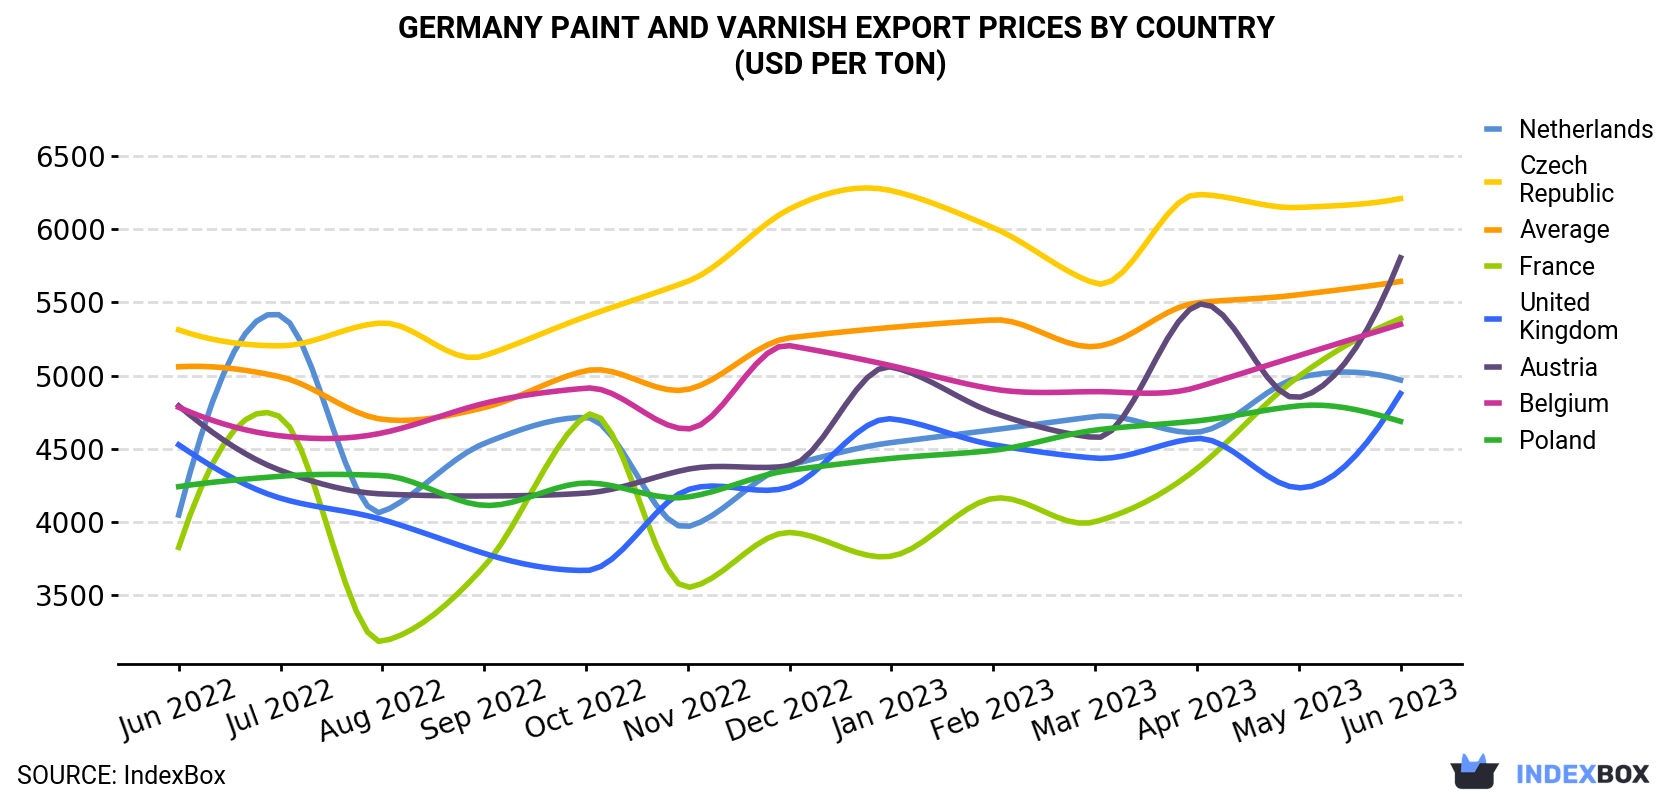 Germany Paint and Varnish Export Prices By Country (USD Per Ton)